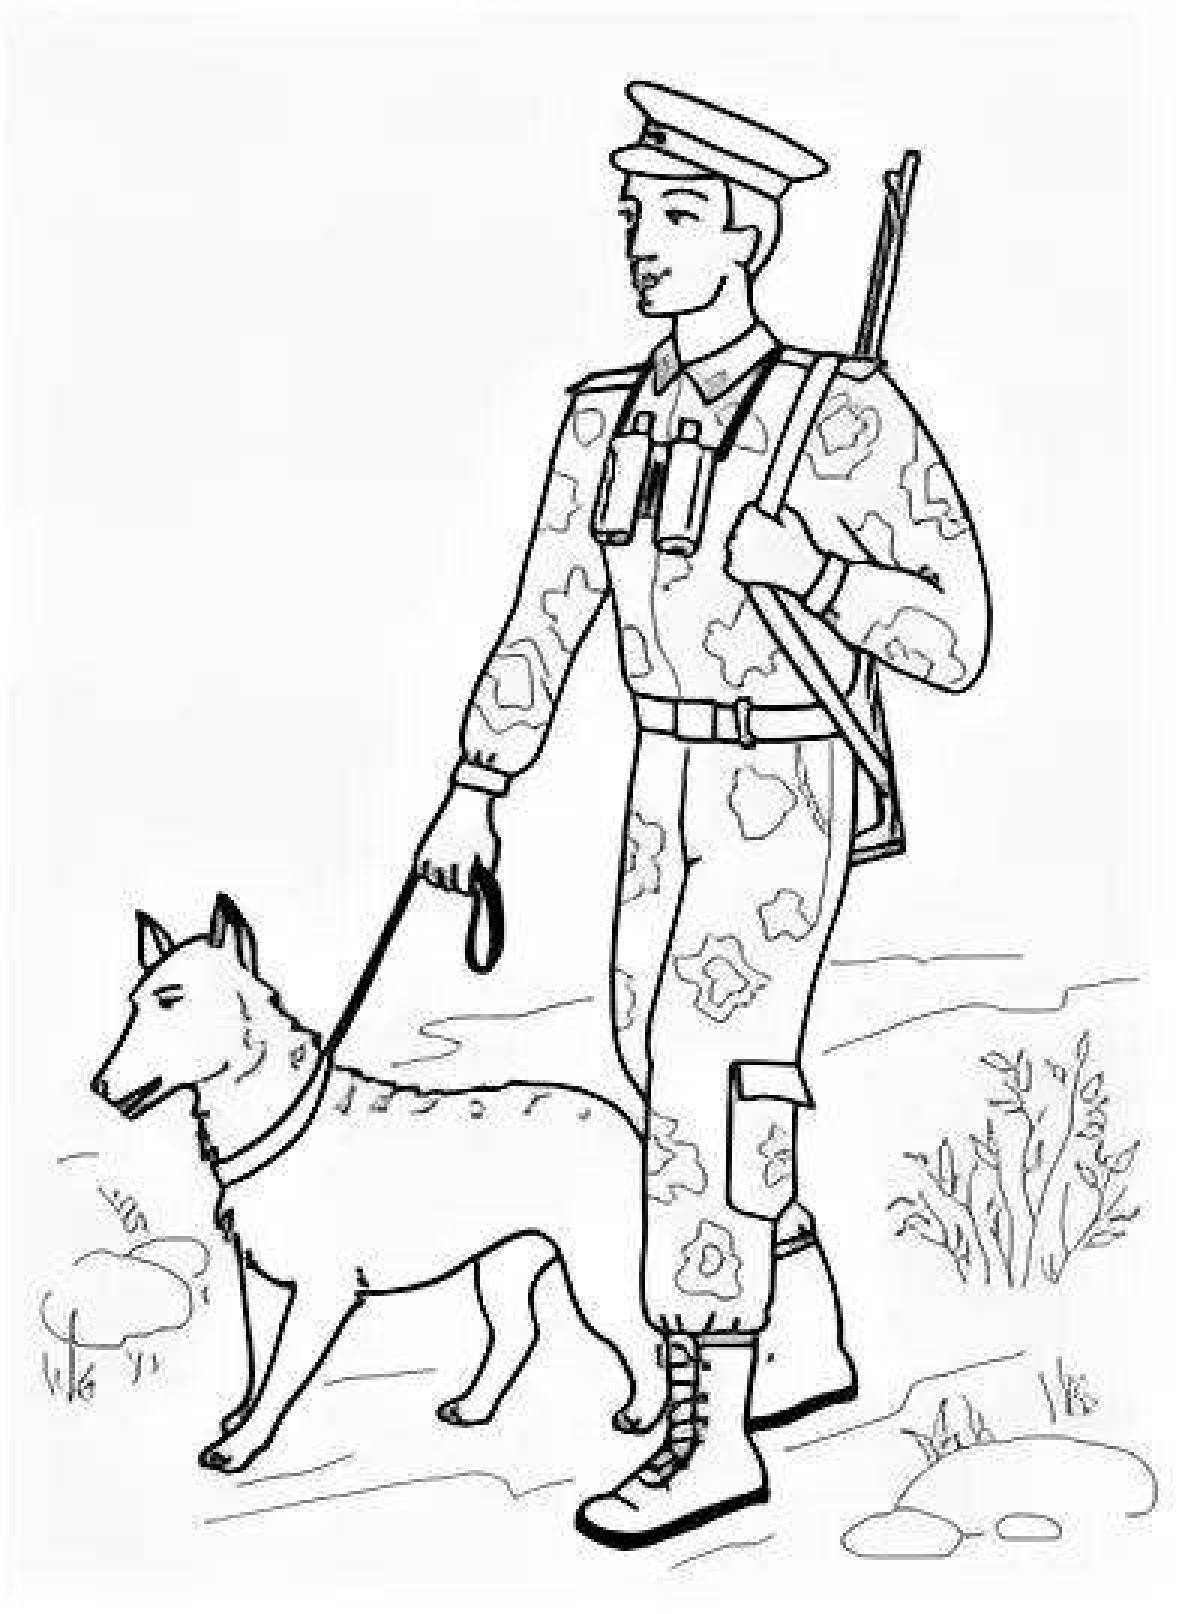 Colourful border guard with dog